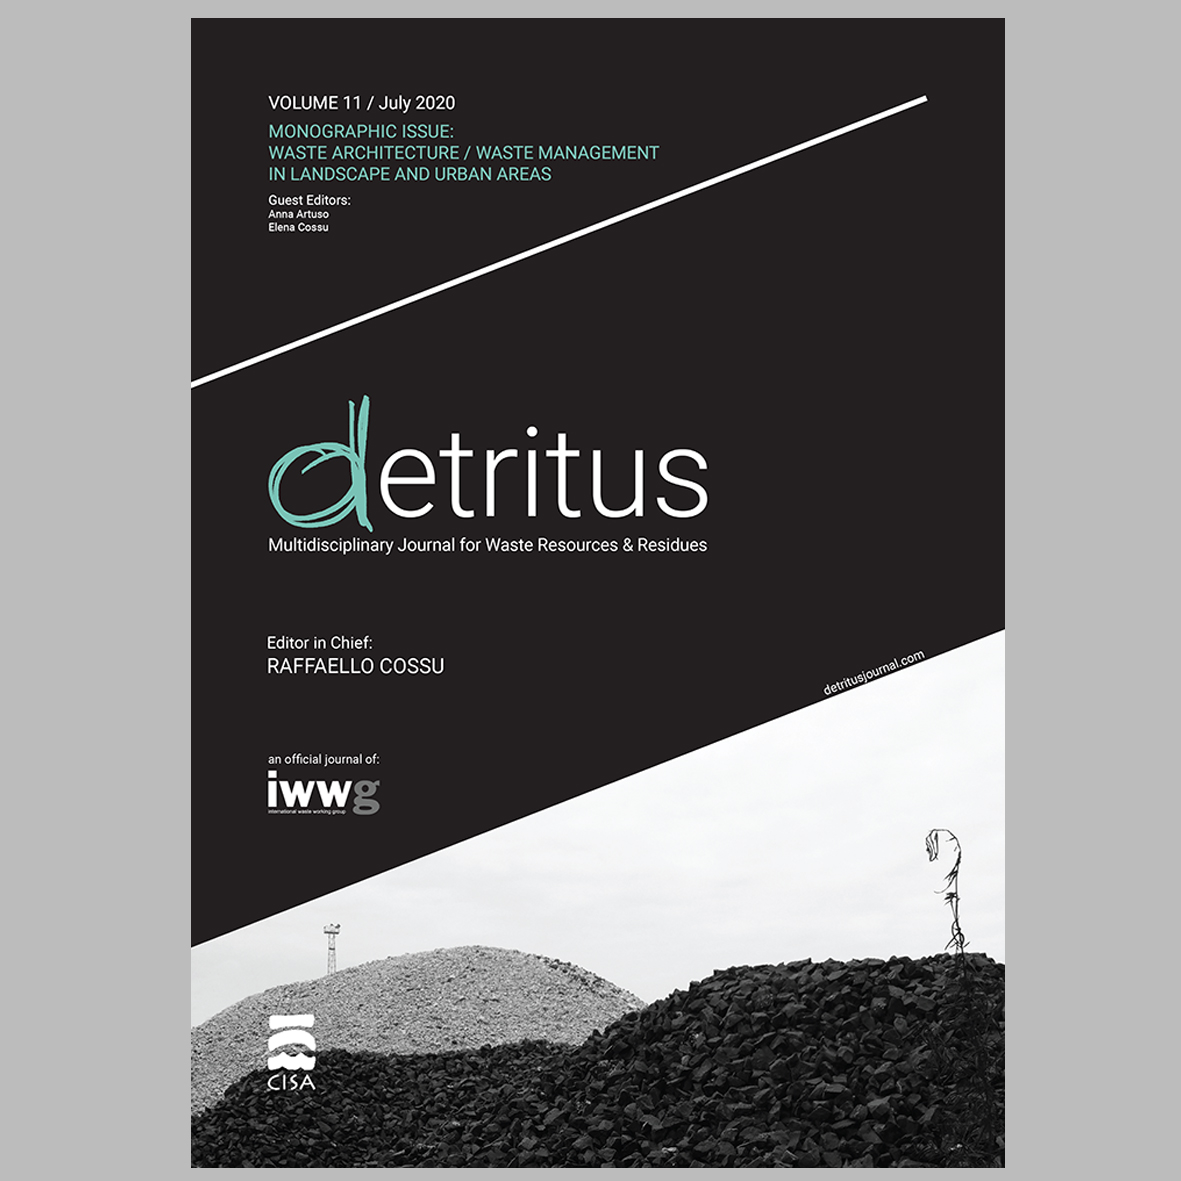 Detritus Journal – Monographic issue: WASTE MANAGEMENT IN LANDSCAPE AND URBAN AREAS